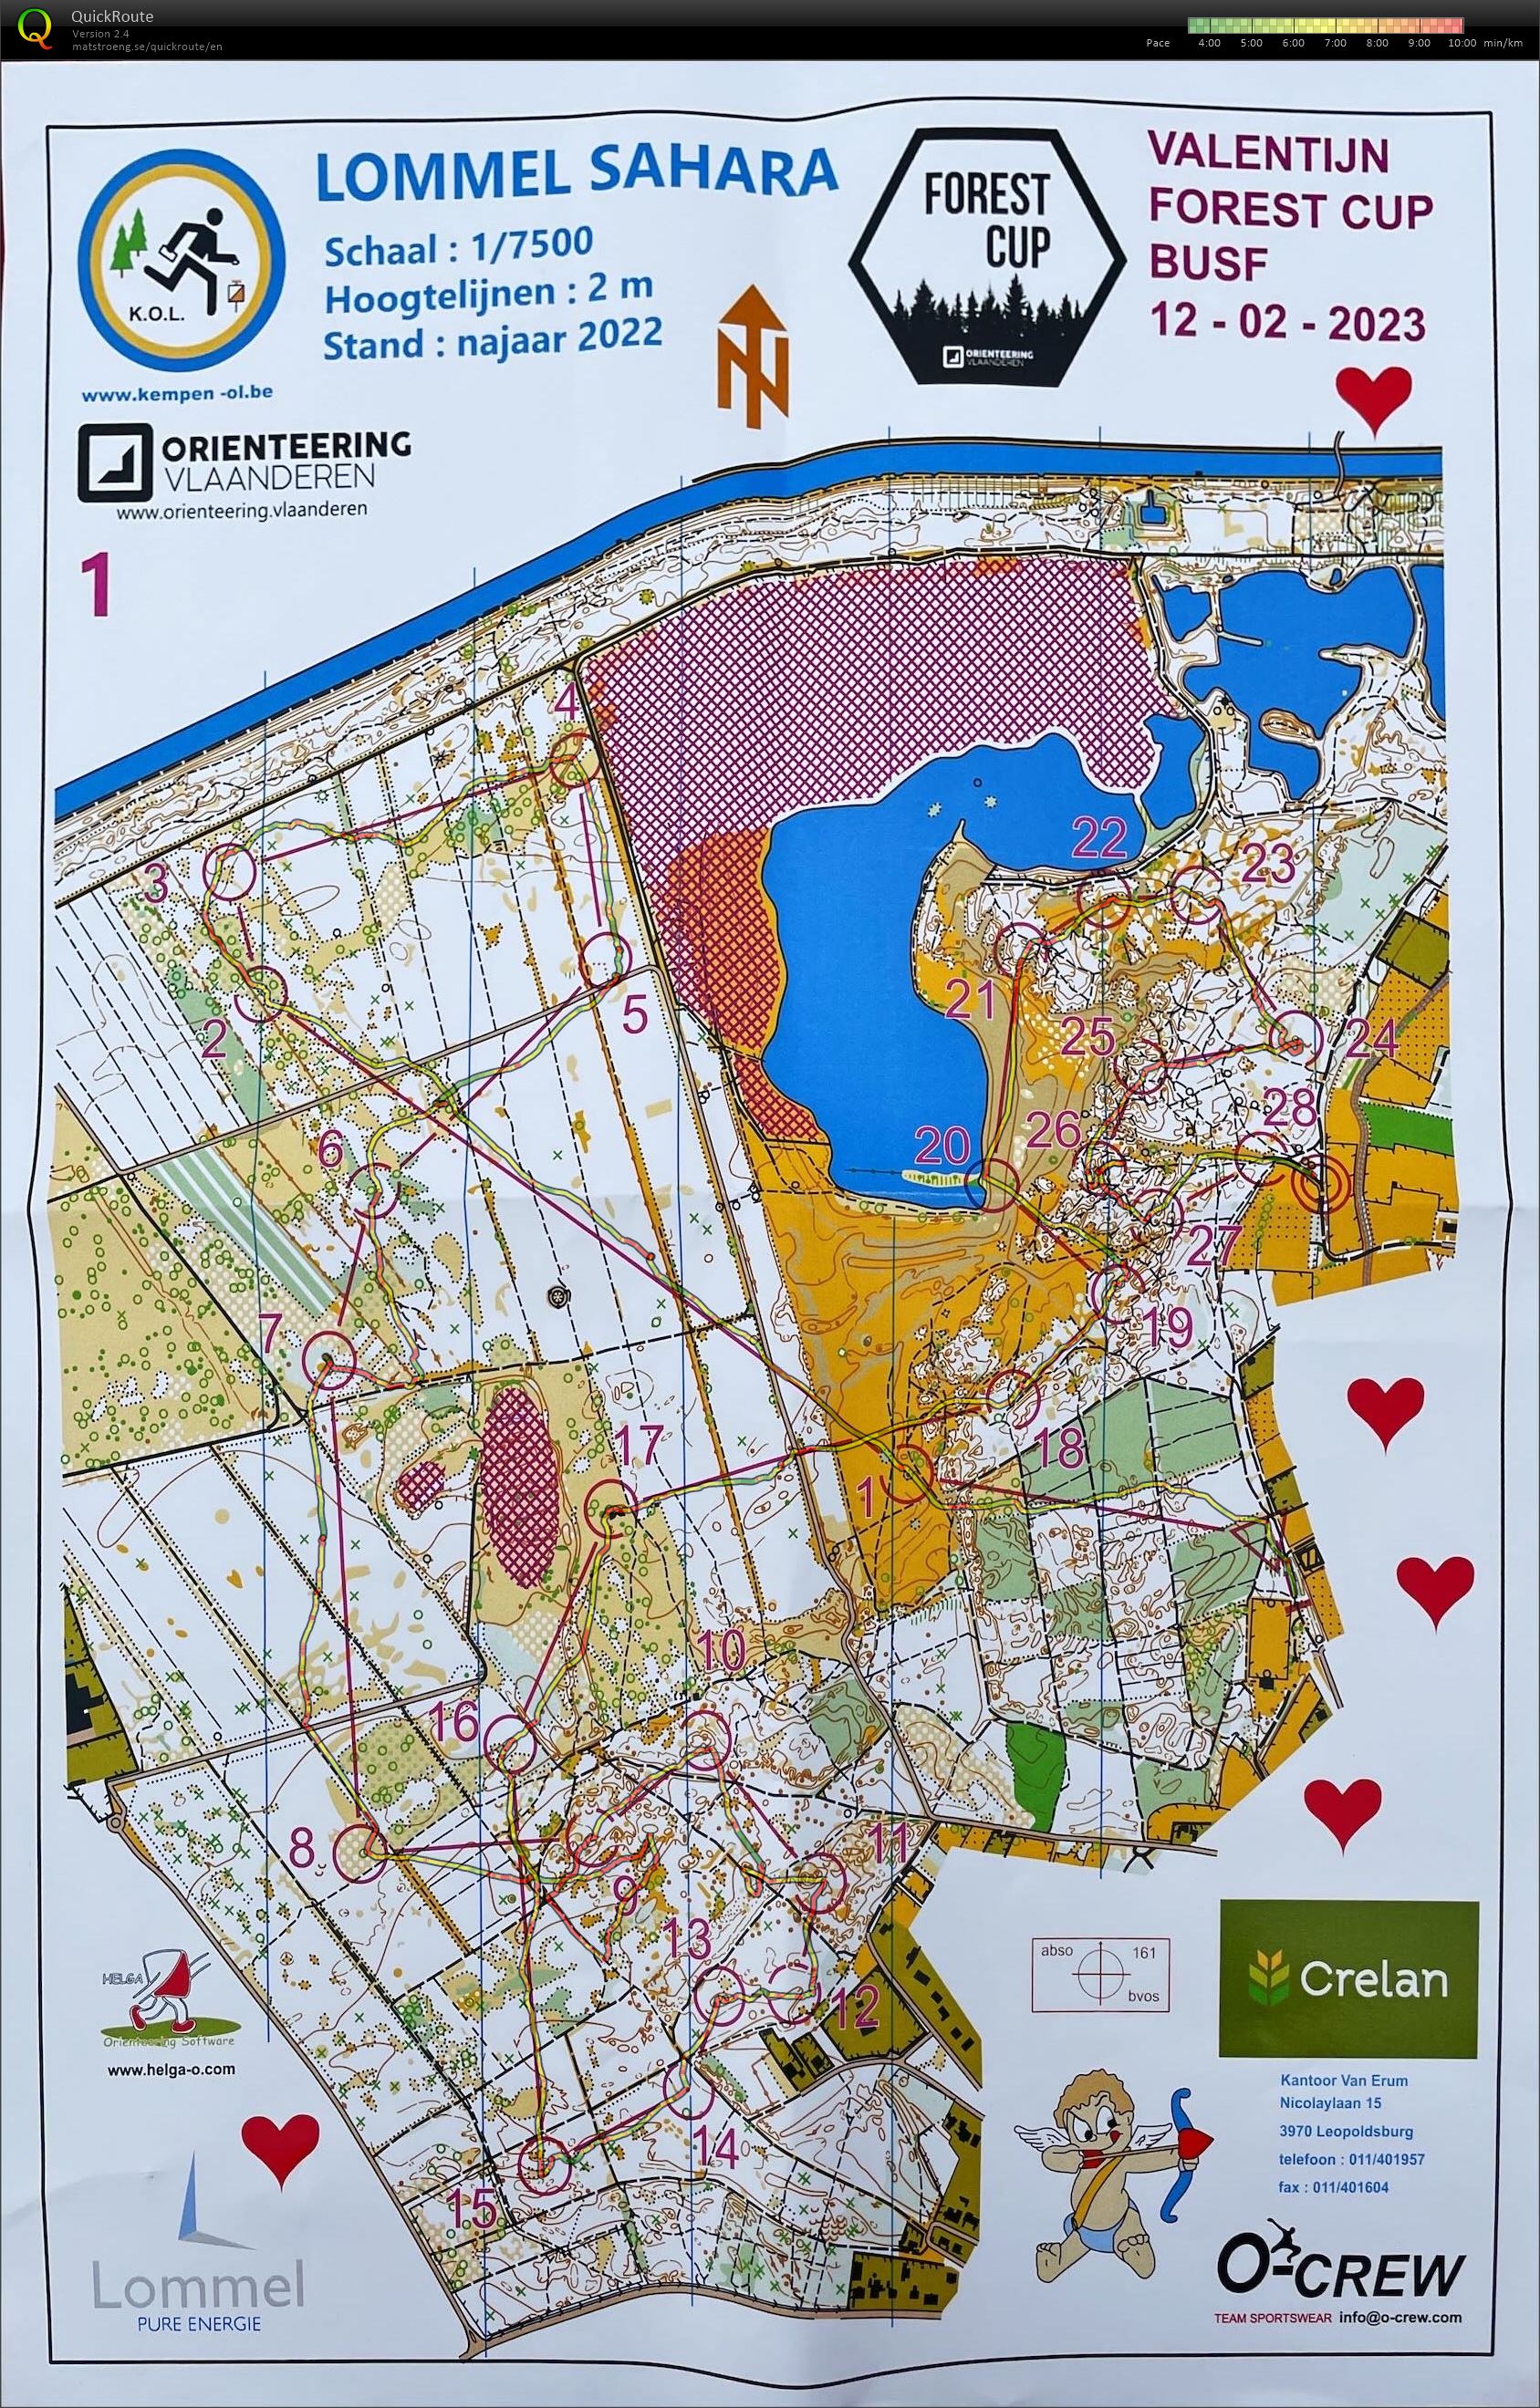 Valentijn Forest Cup (12.02.2023)